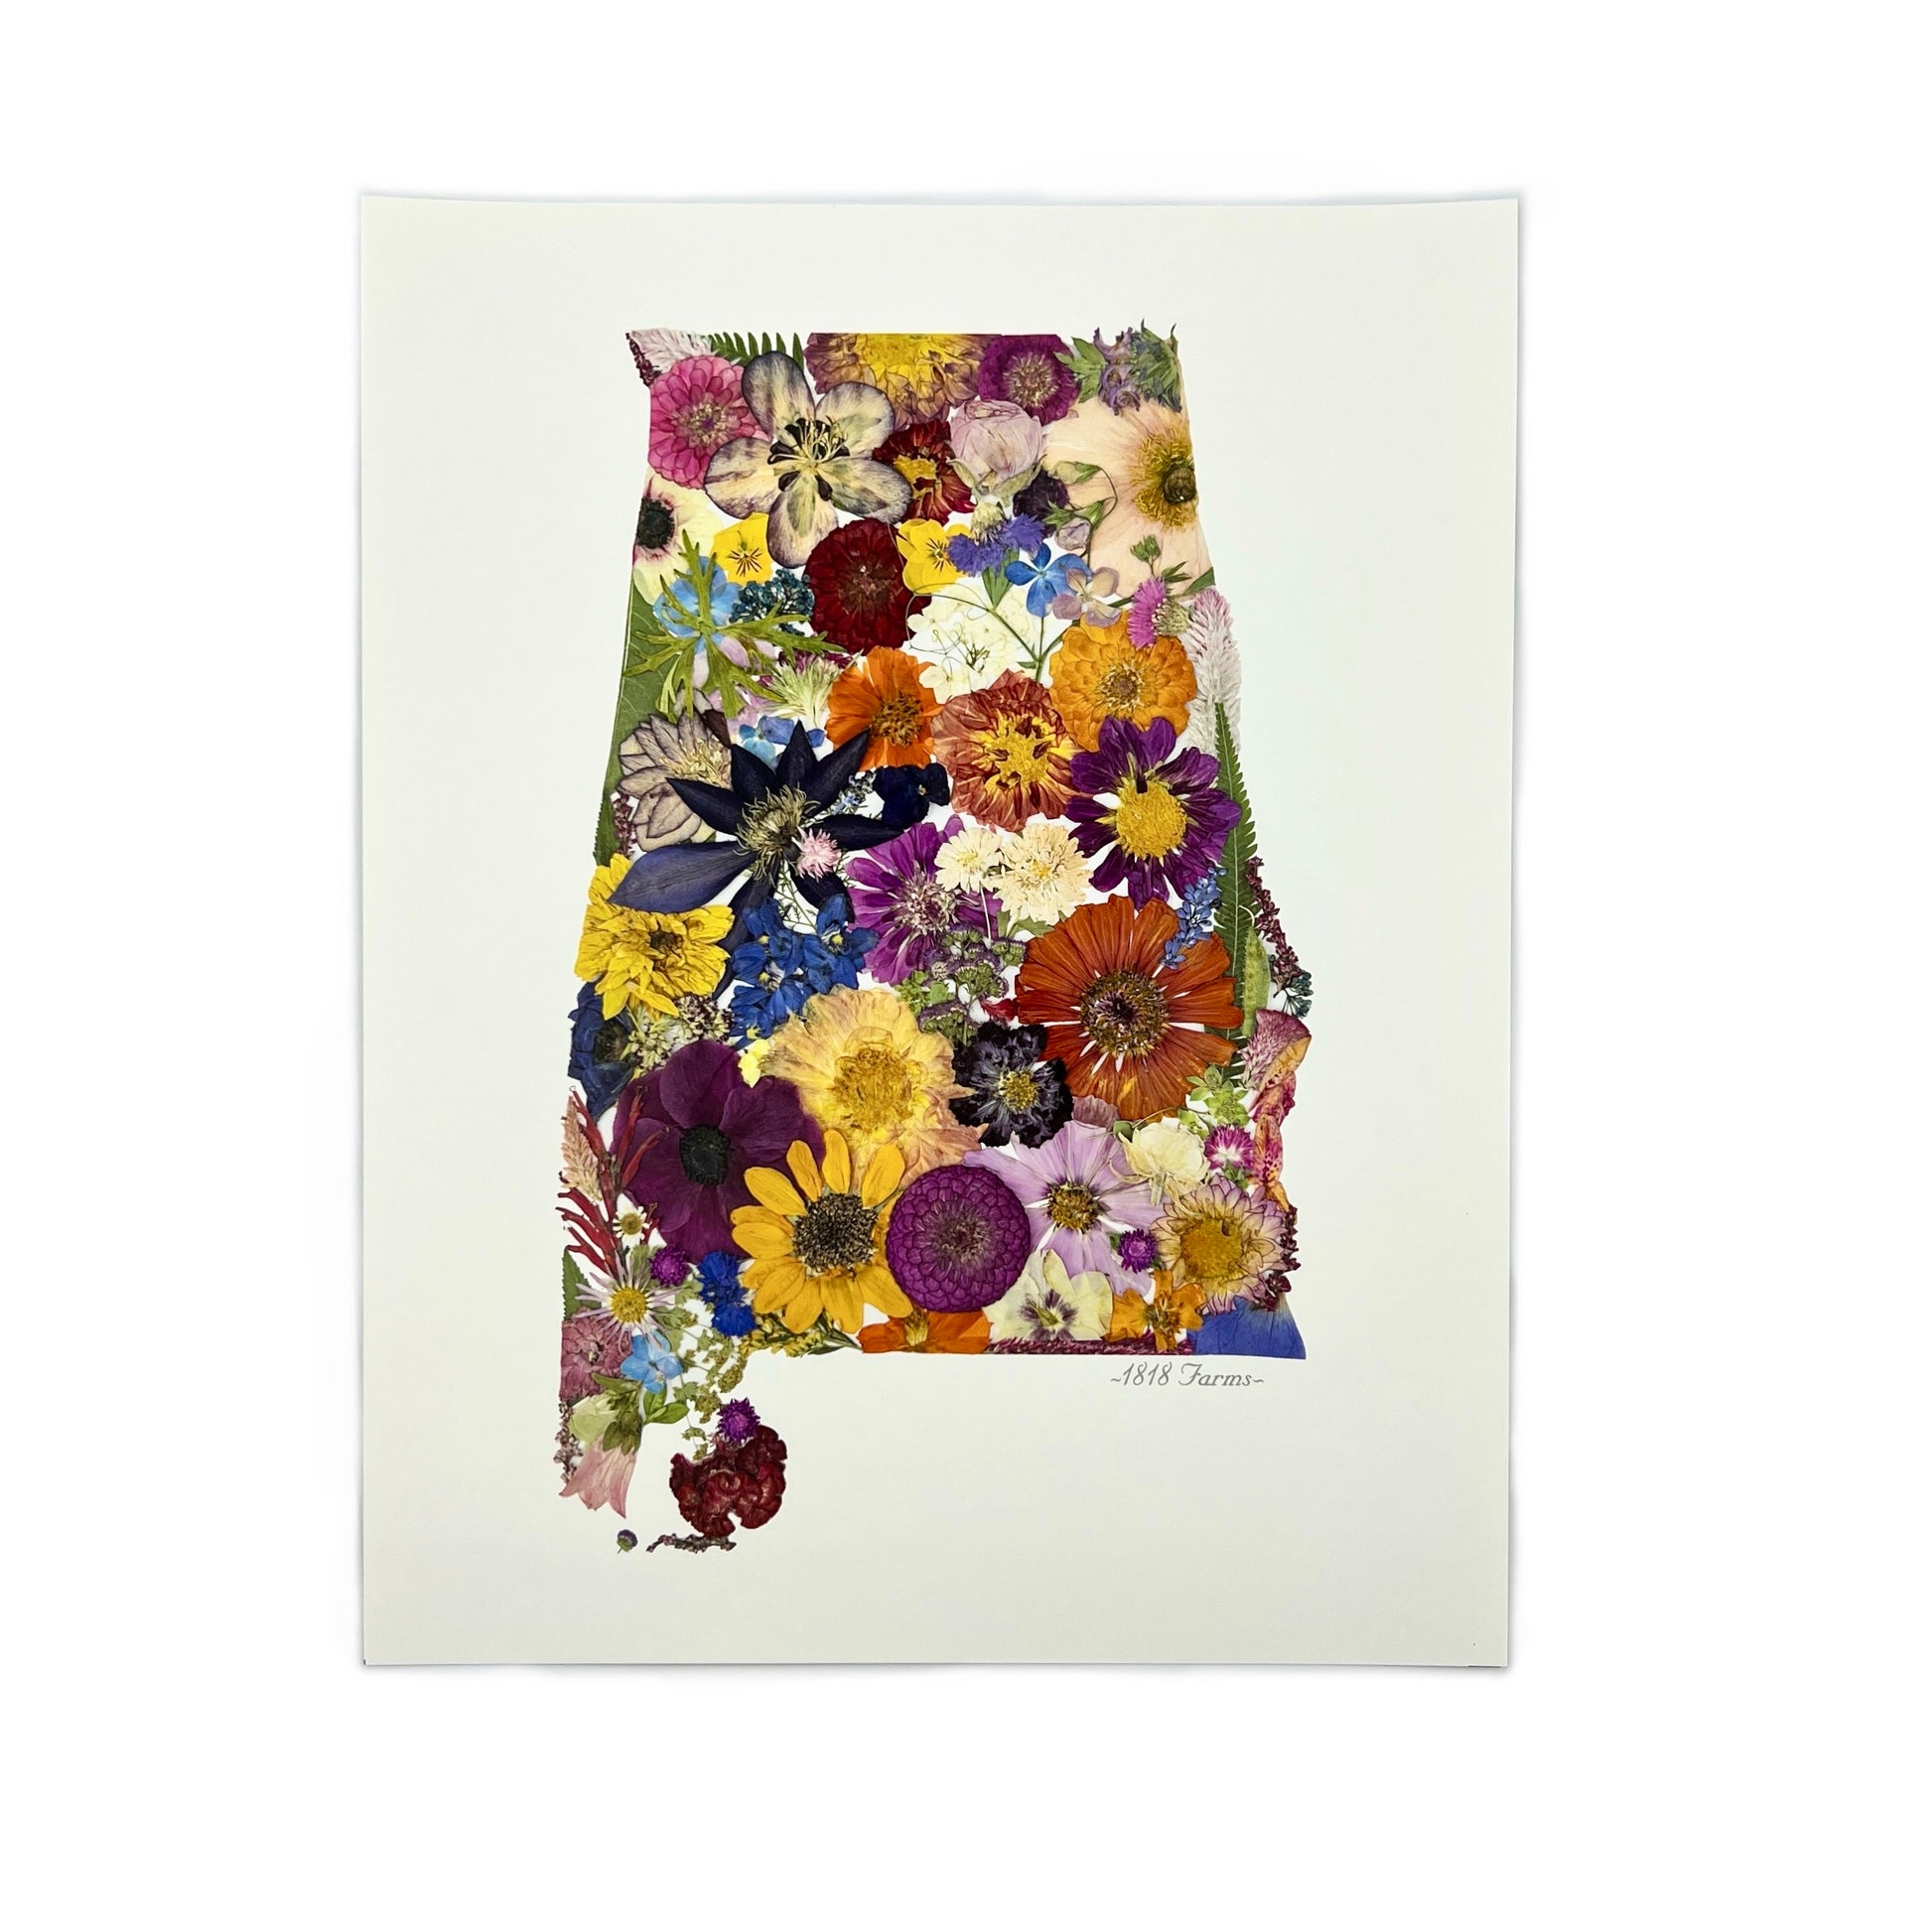 State Themed Giclée Print Featuring Dried, Pressed Flowers - "Where I Bloom" Collection Giclee Art Print 1818 Farms 11"x14" Alabama 